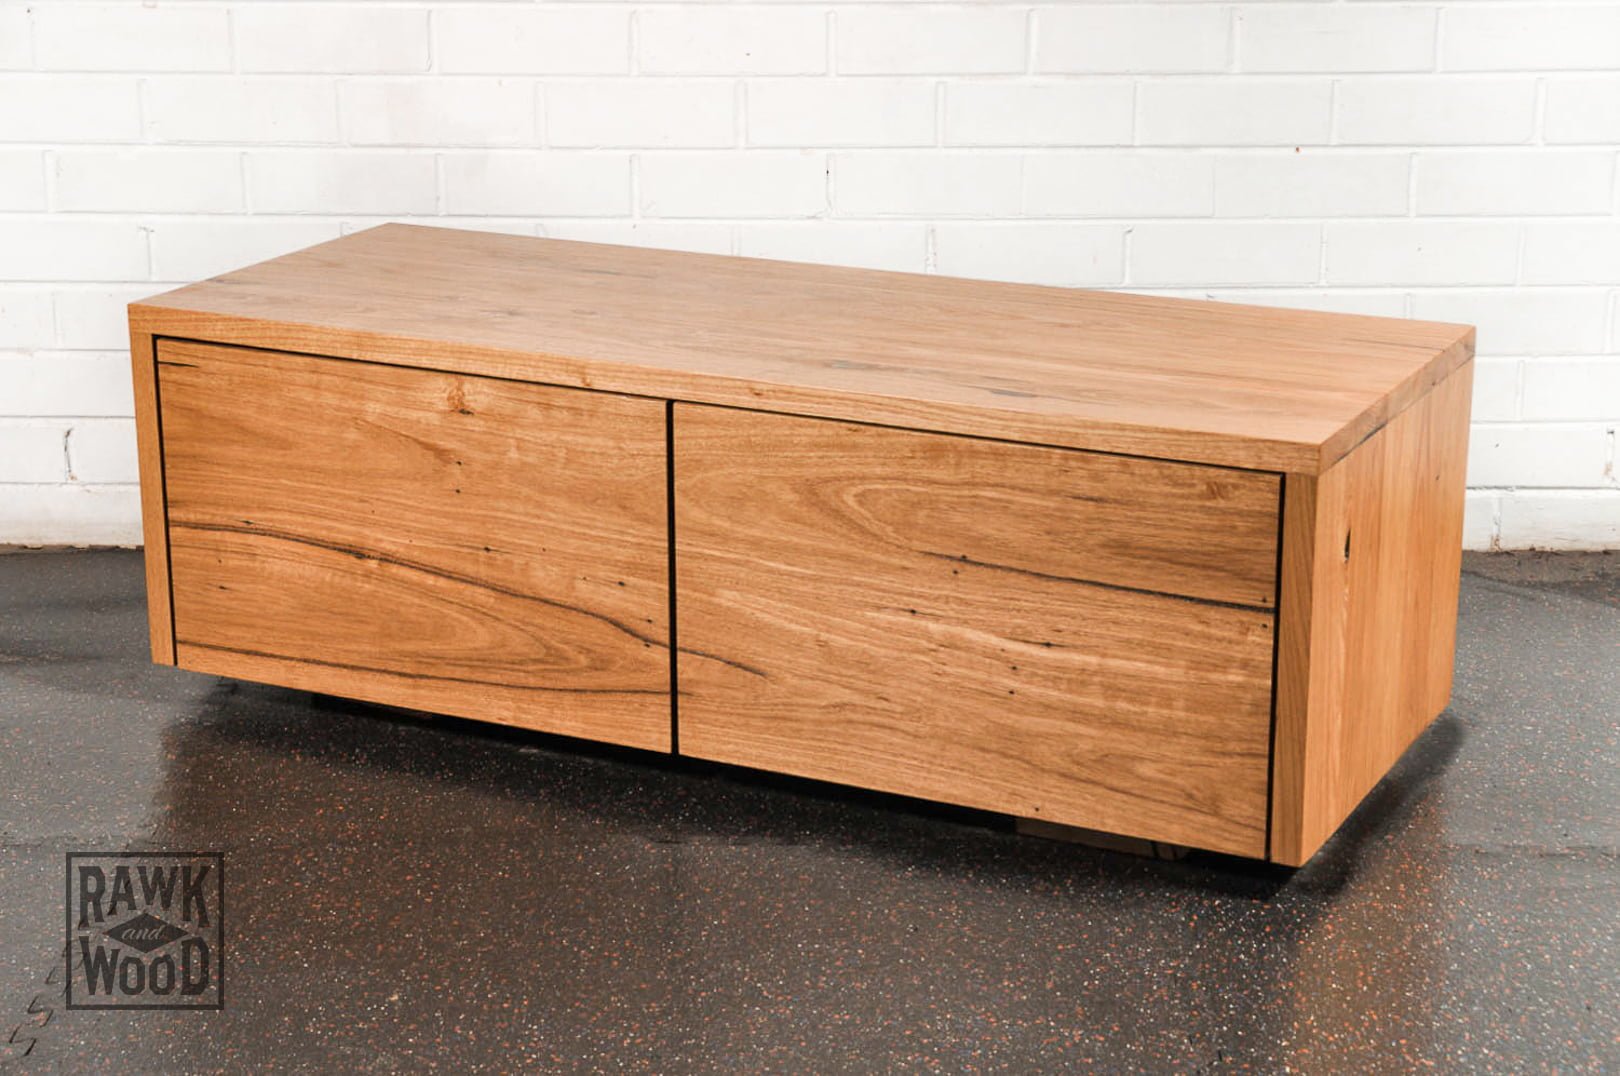 Recycled-Timber-Vanity, made in Melbourne by Rawk and Wood